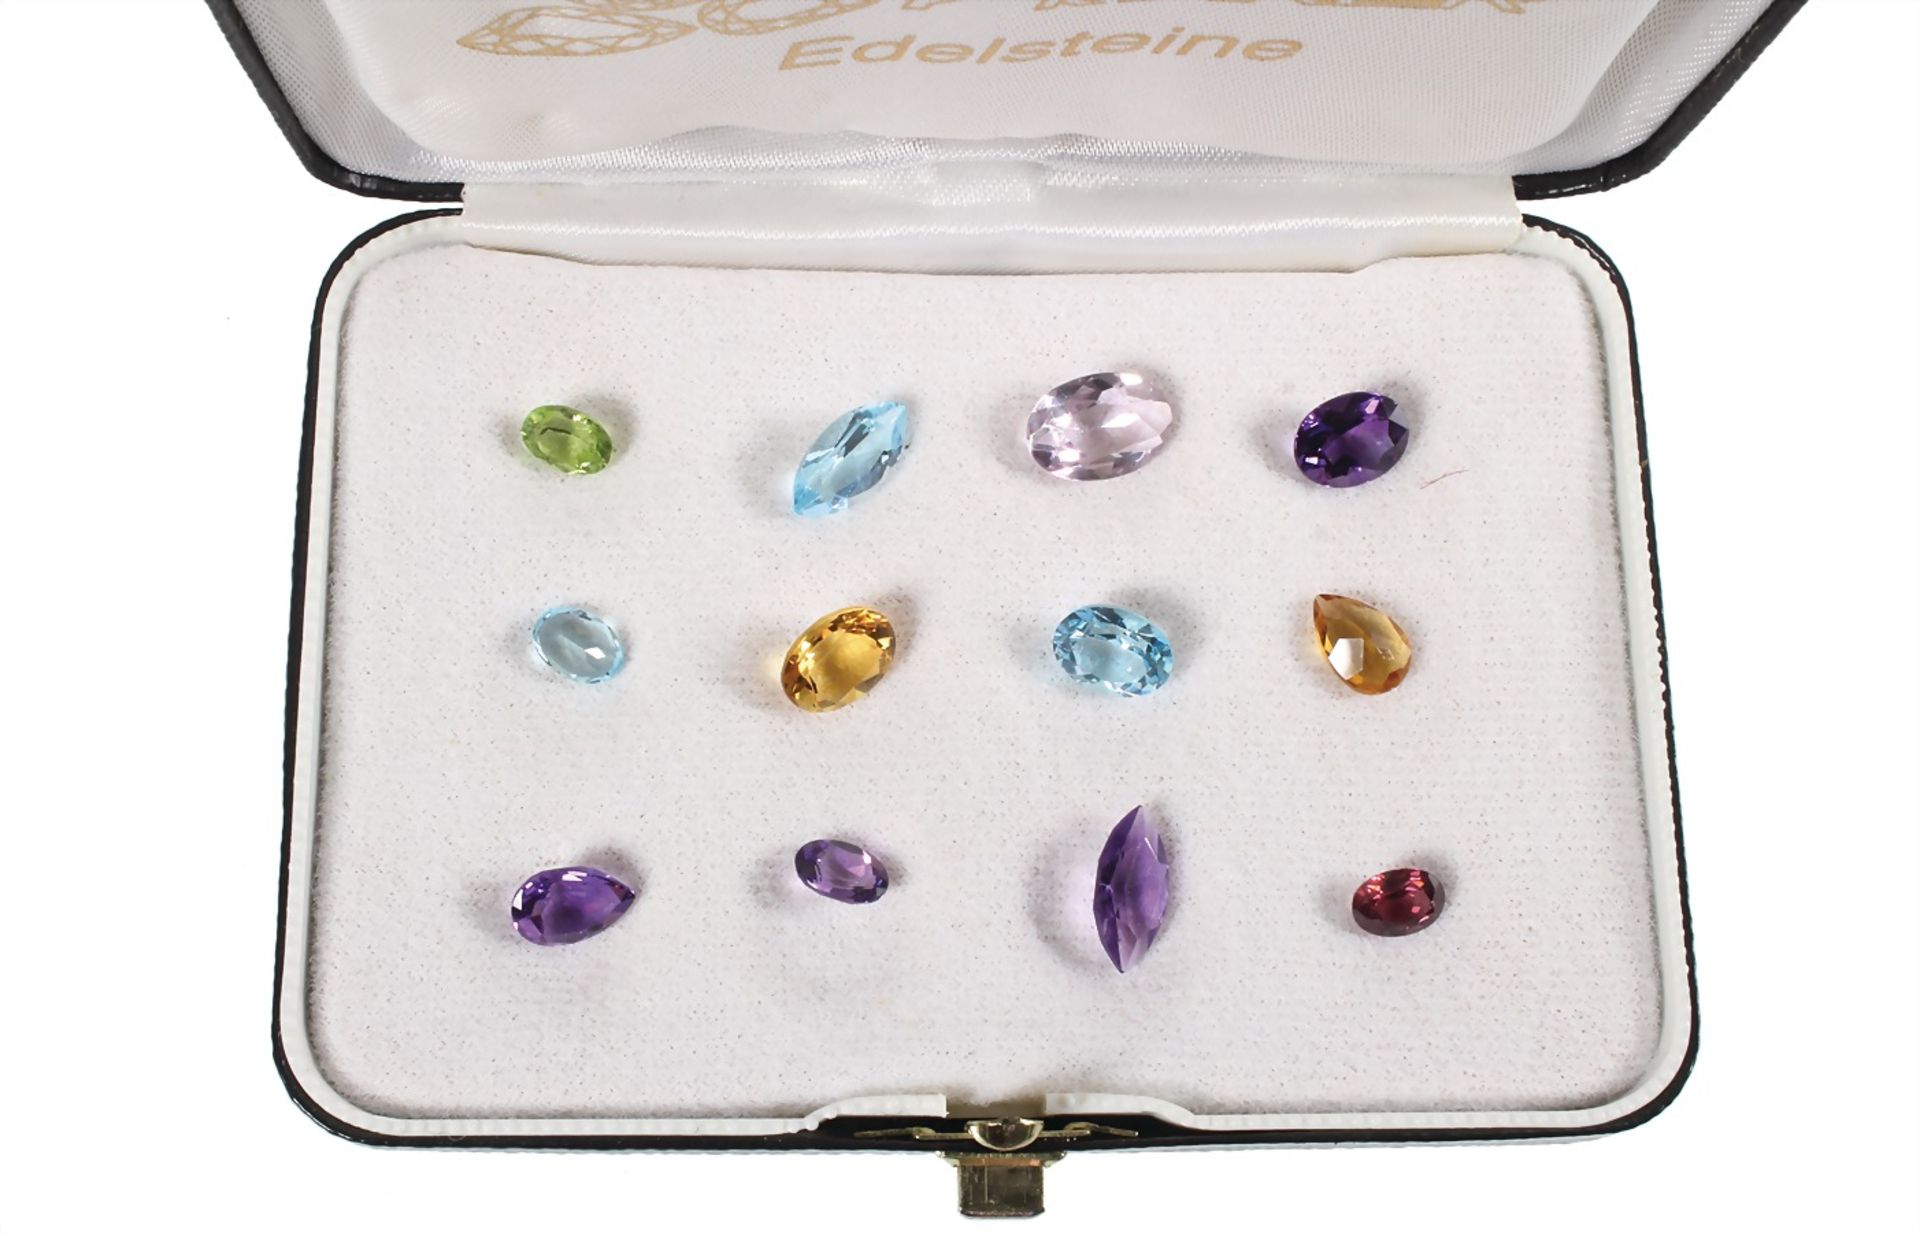 lot: 12 faceted gems, amethysts, citrines, peridot, garnet and topazes, total 18.0 ct, small gem